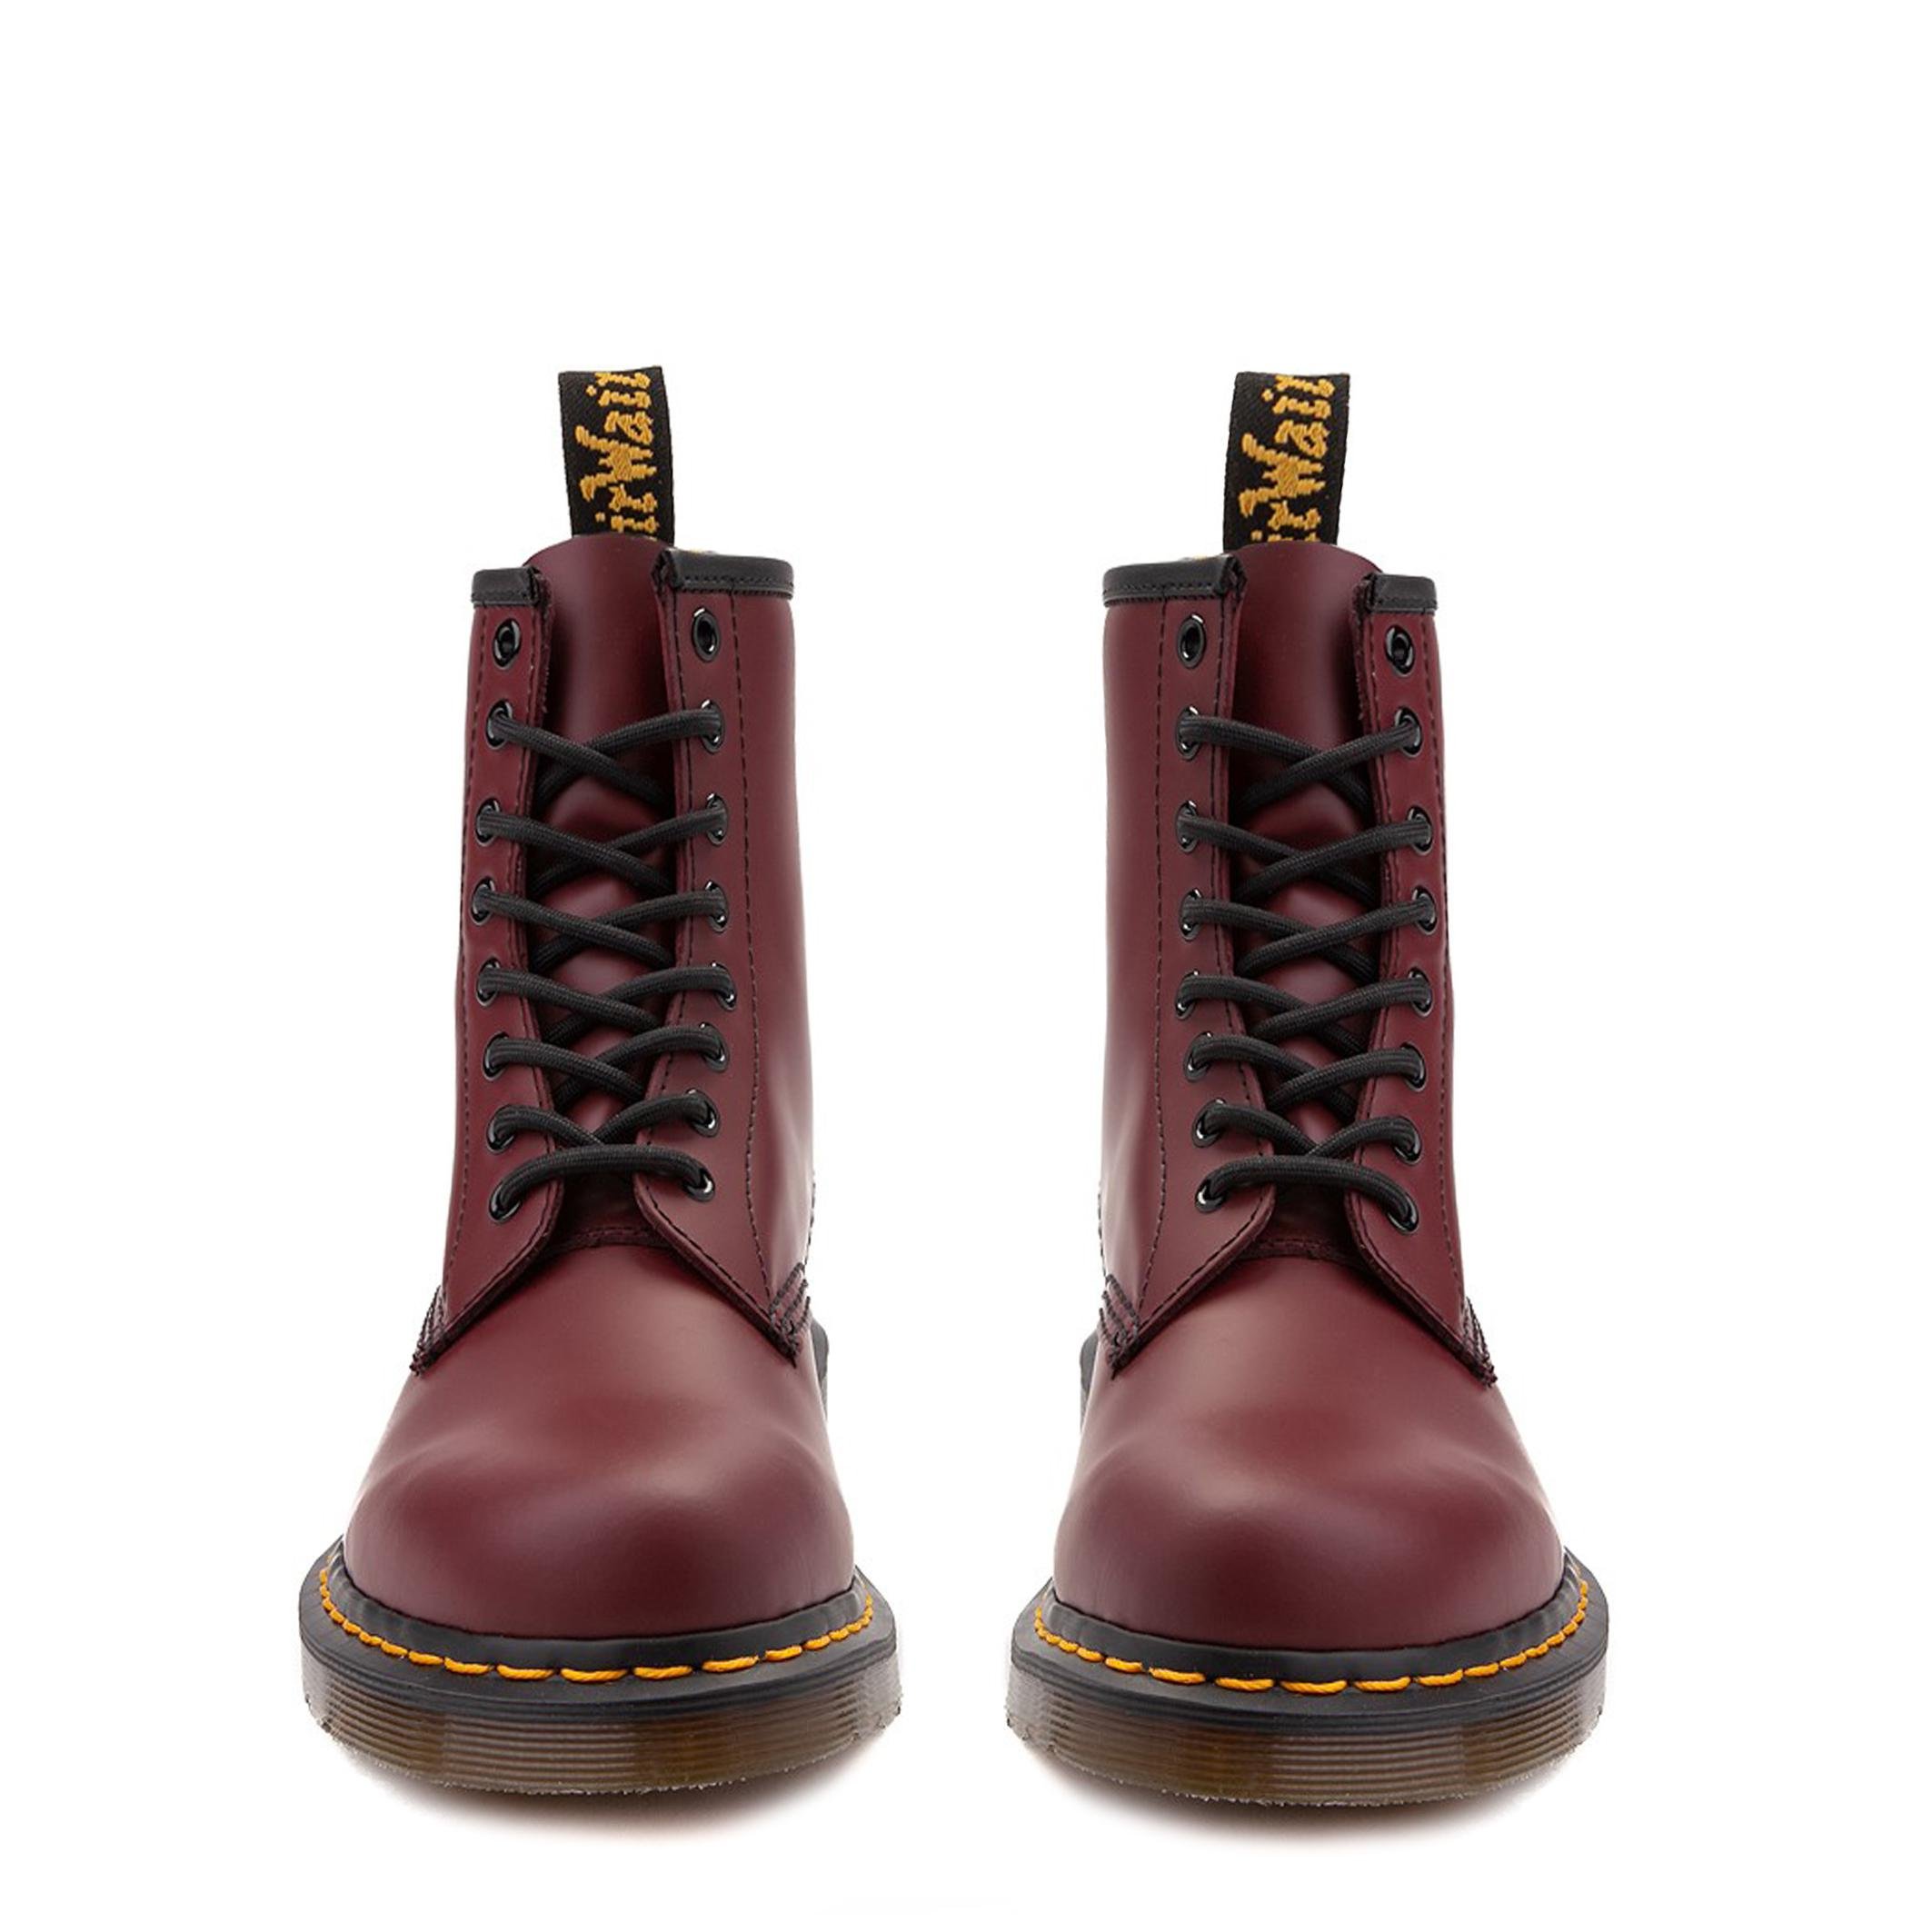 Dr. Martens 1460 botas militares unisex adulto mujer 39 rojo cherry red